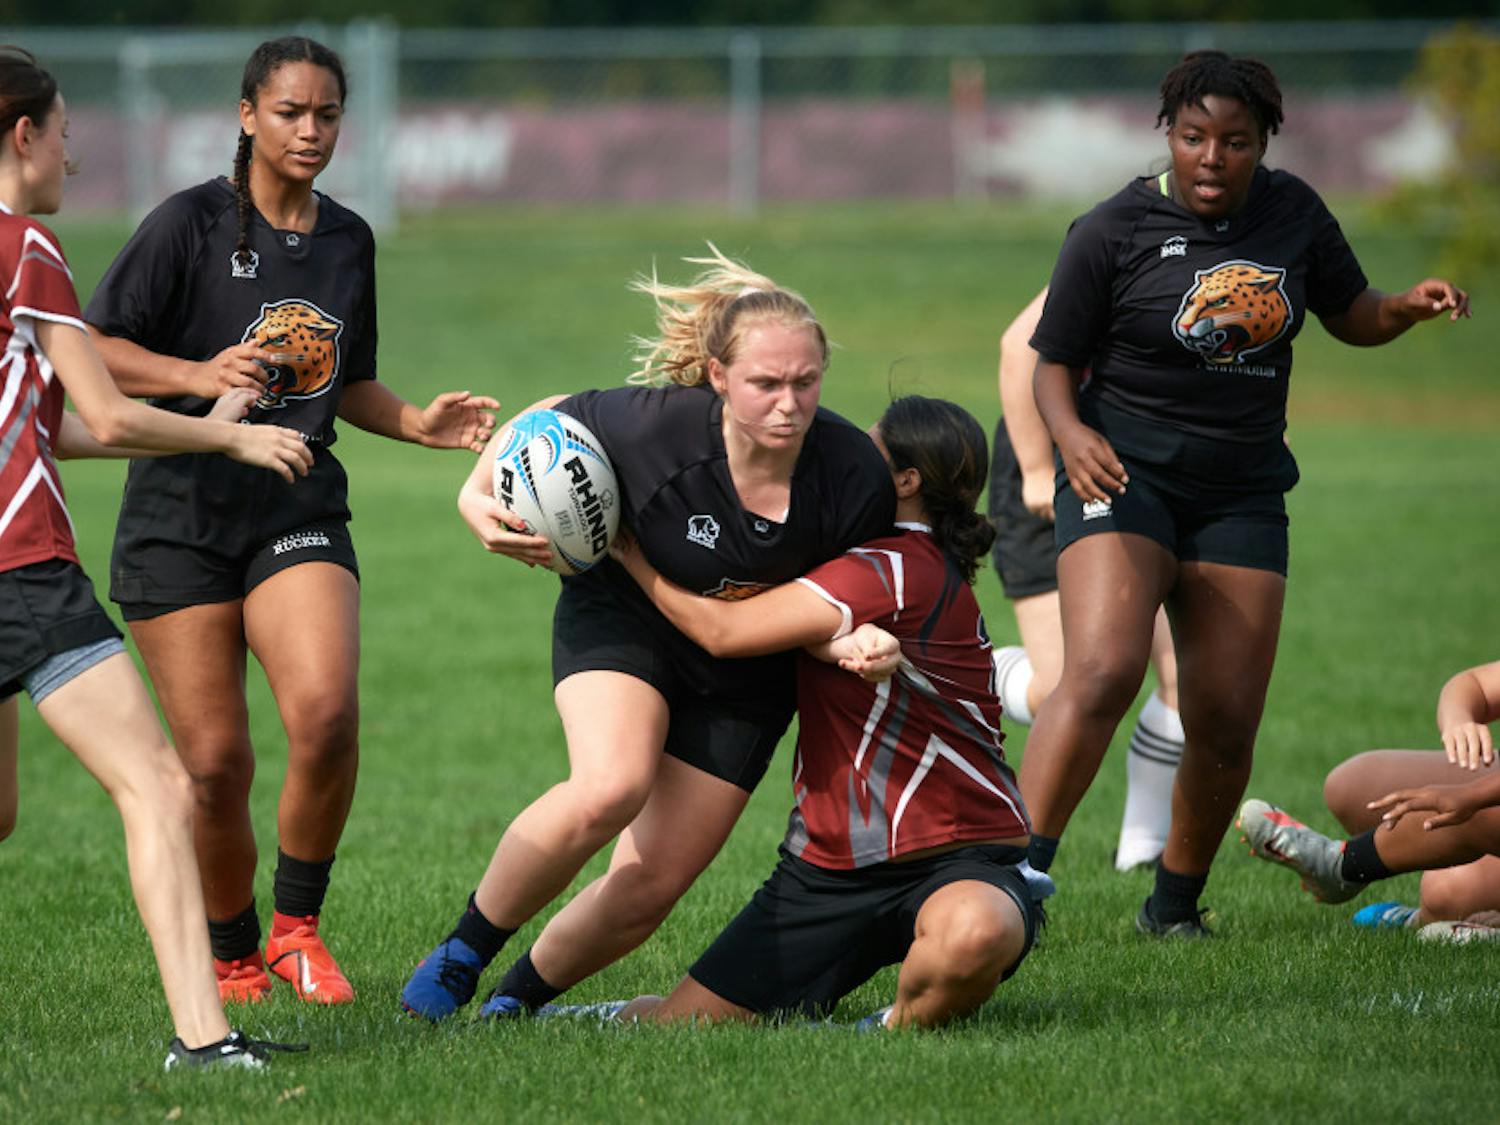 IUPUI-WRugby-7s-39